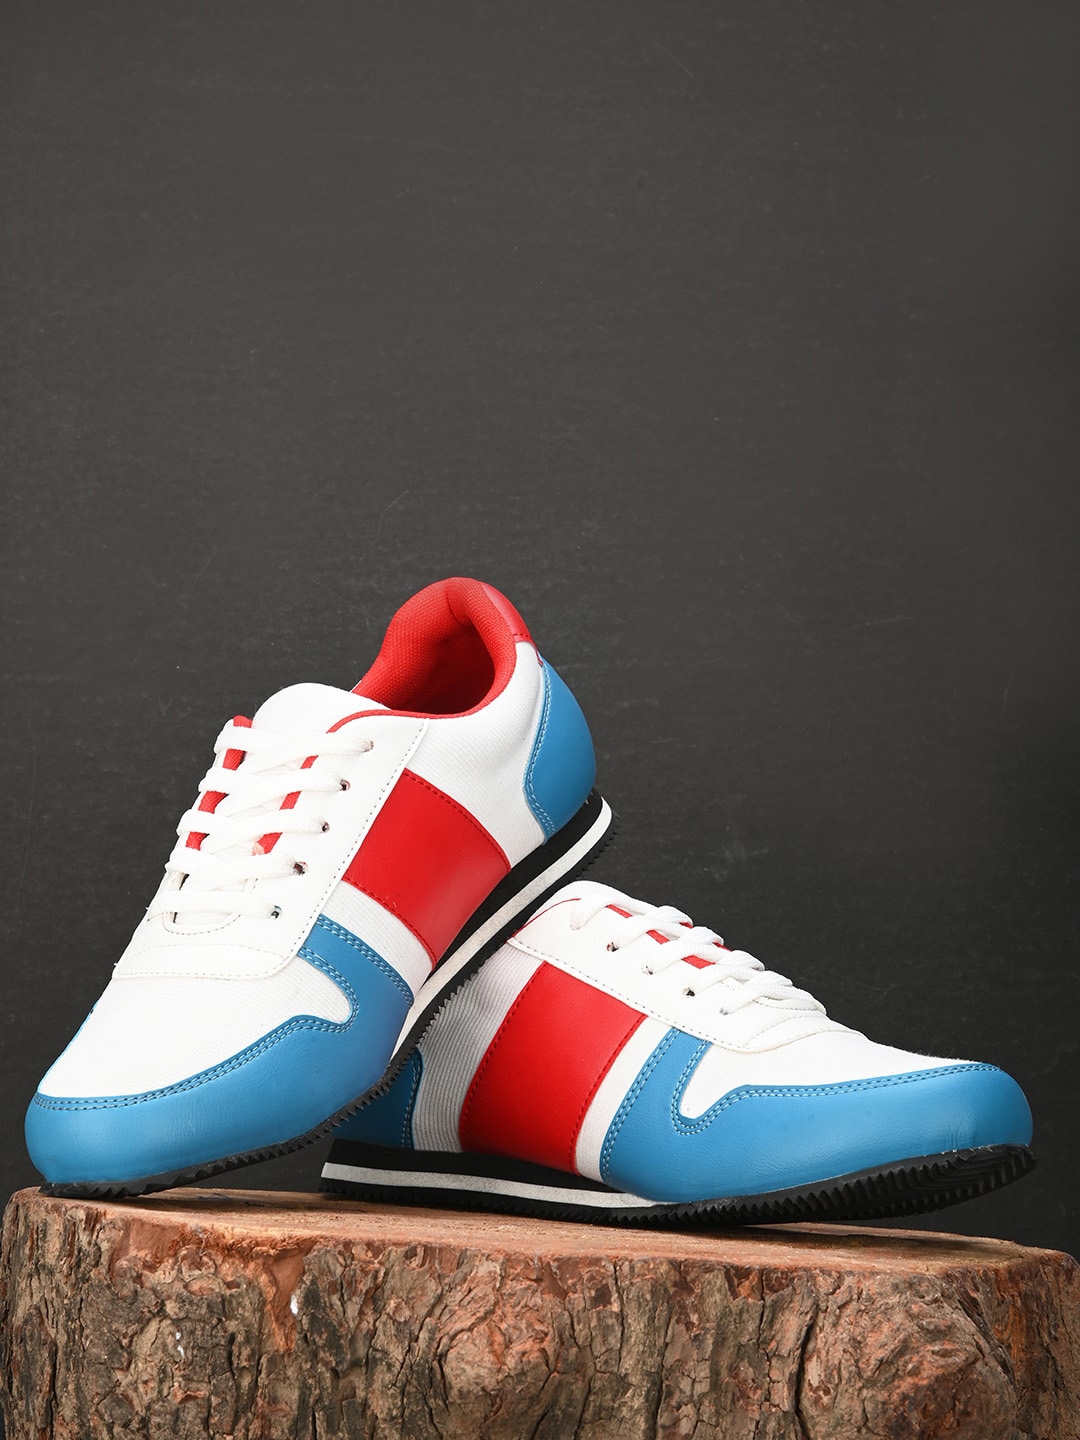 Mast & Harbour Men Cream-Coloured & Red Colourblocked Sneakers (9) by Myntra